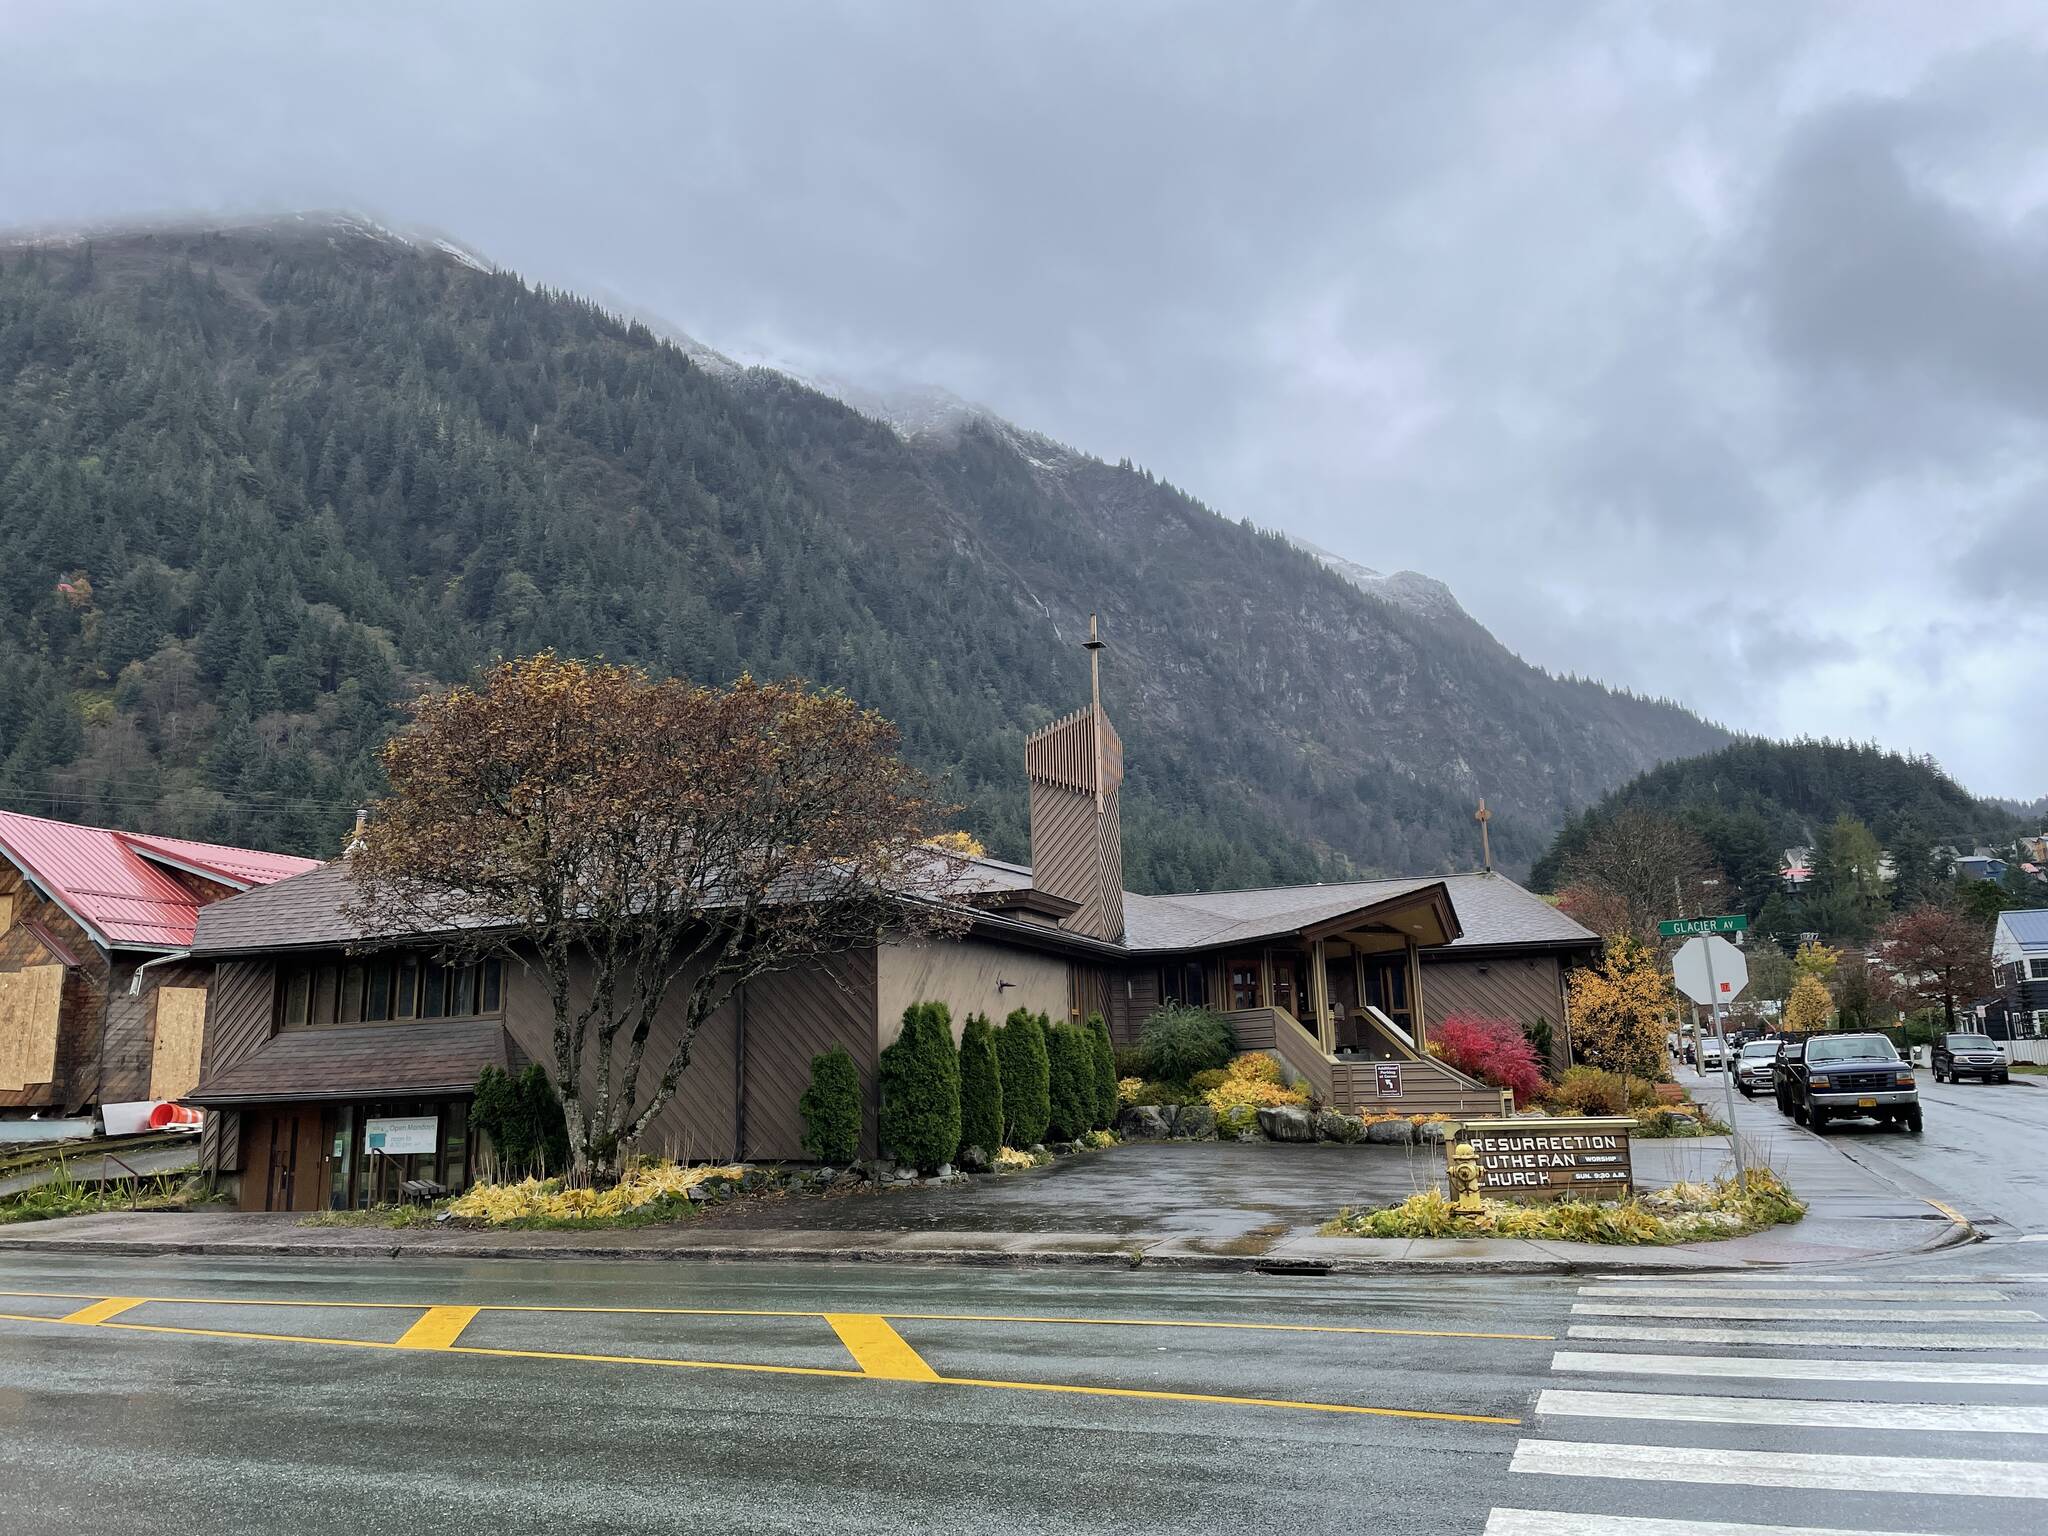 Resurrection Lutheran Church may be the new host of the city’s warming shelter if the church’s bid to host it is approved. (Michael S. Lockett / Juneau Empire)